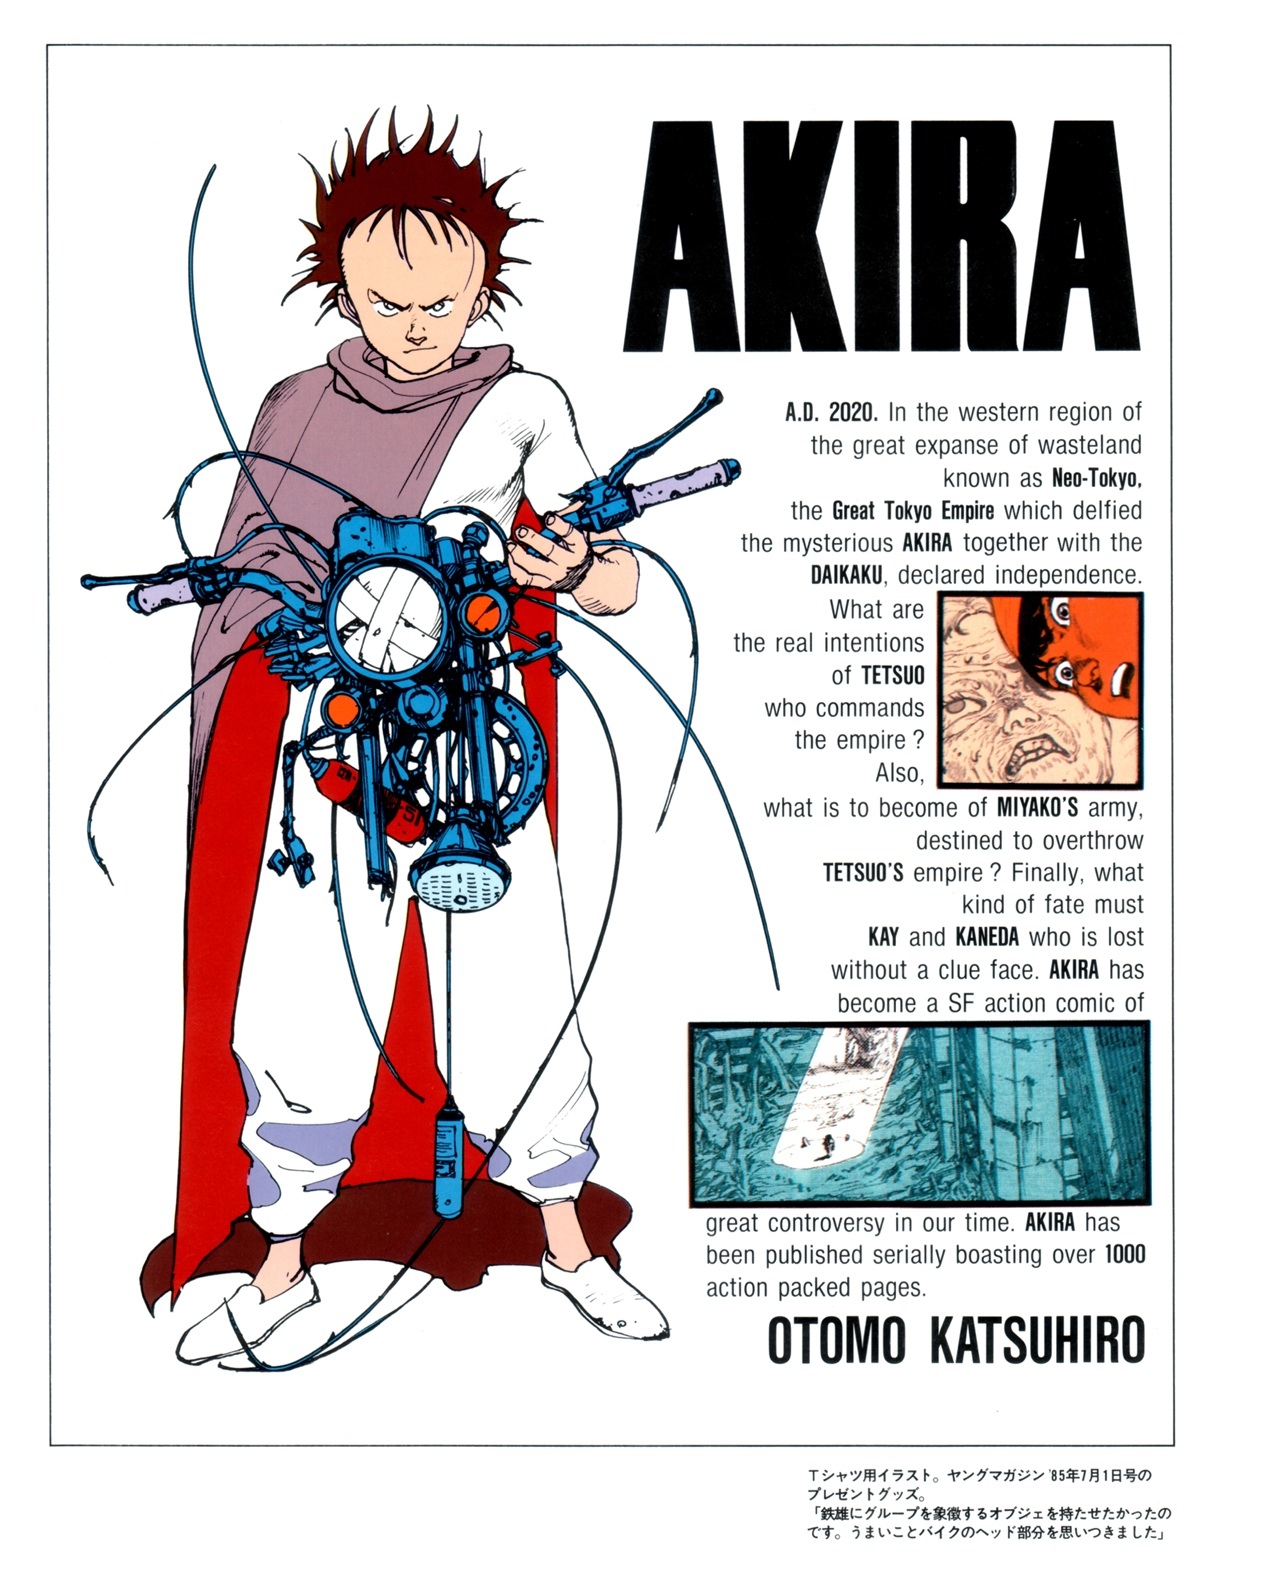 Akira club - The memory of Akira lives on in our hearts! 31